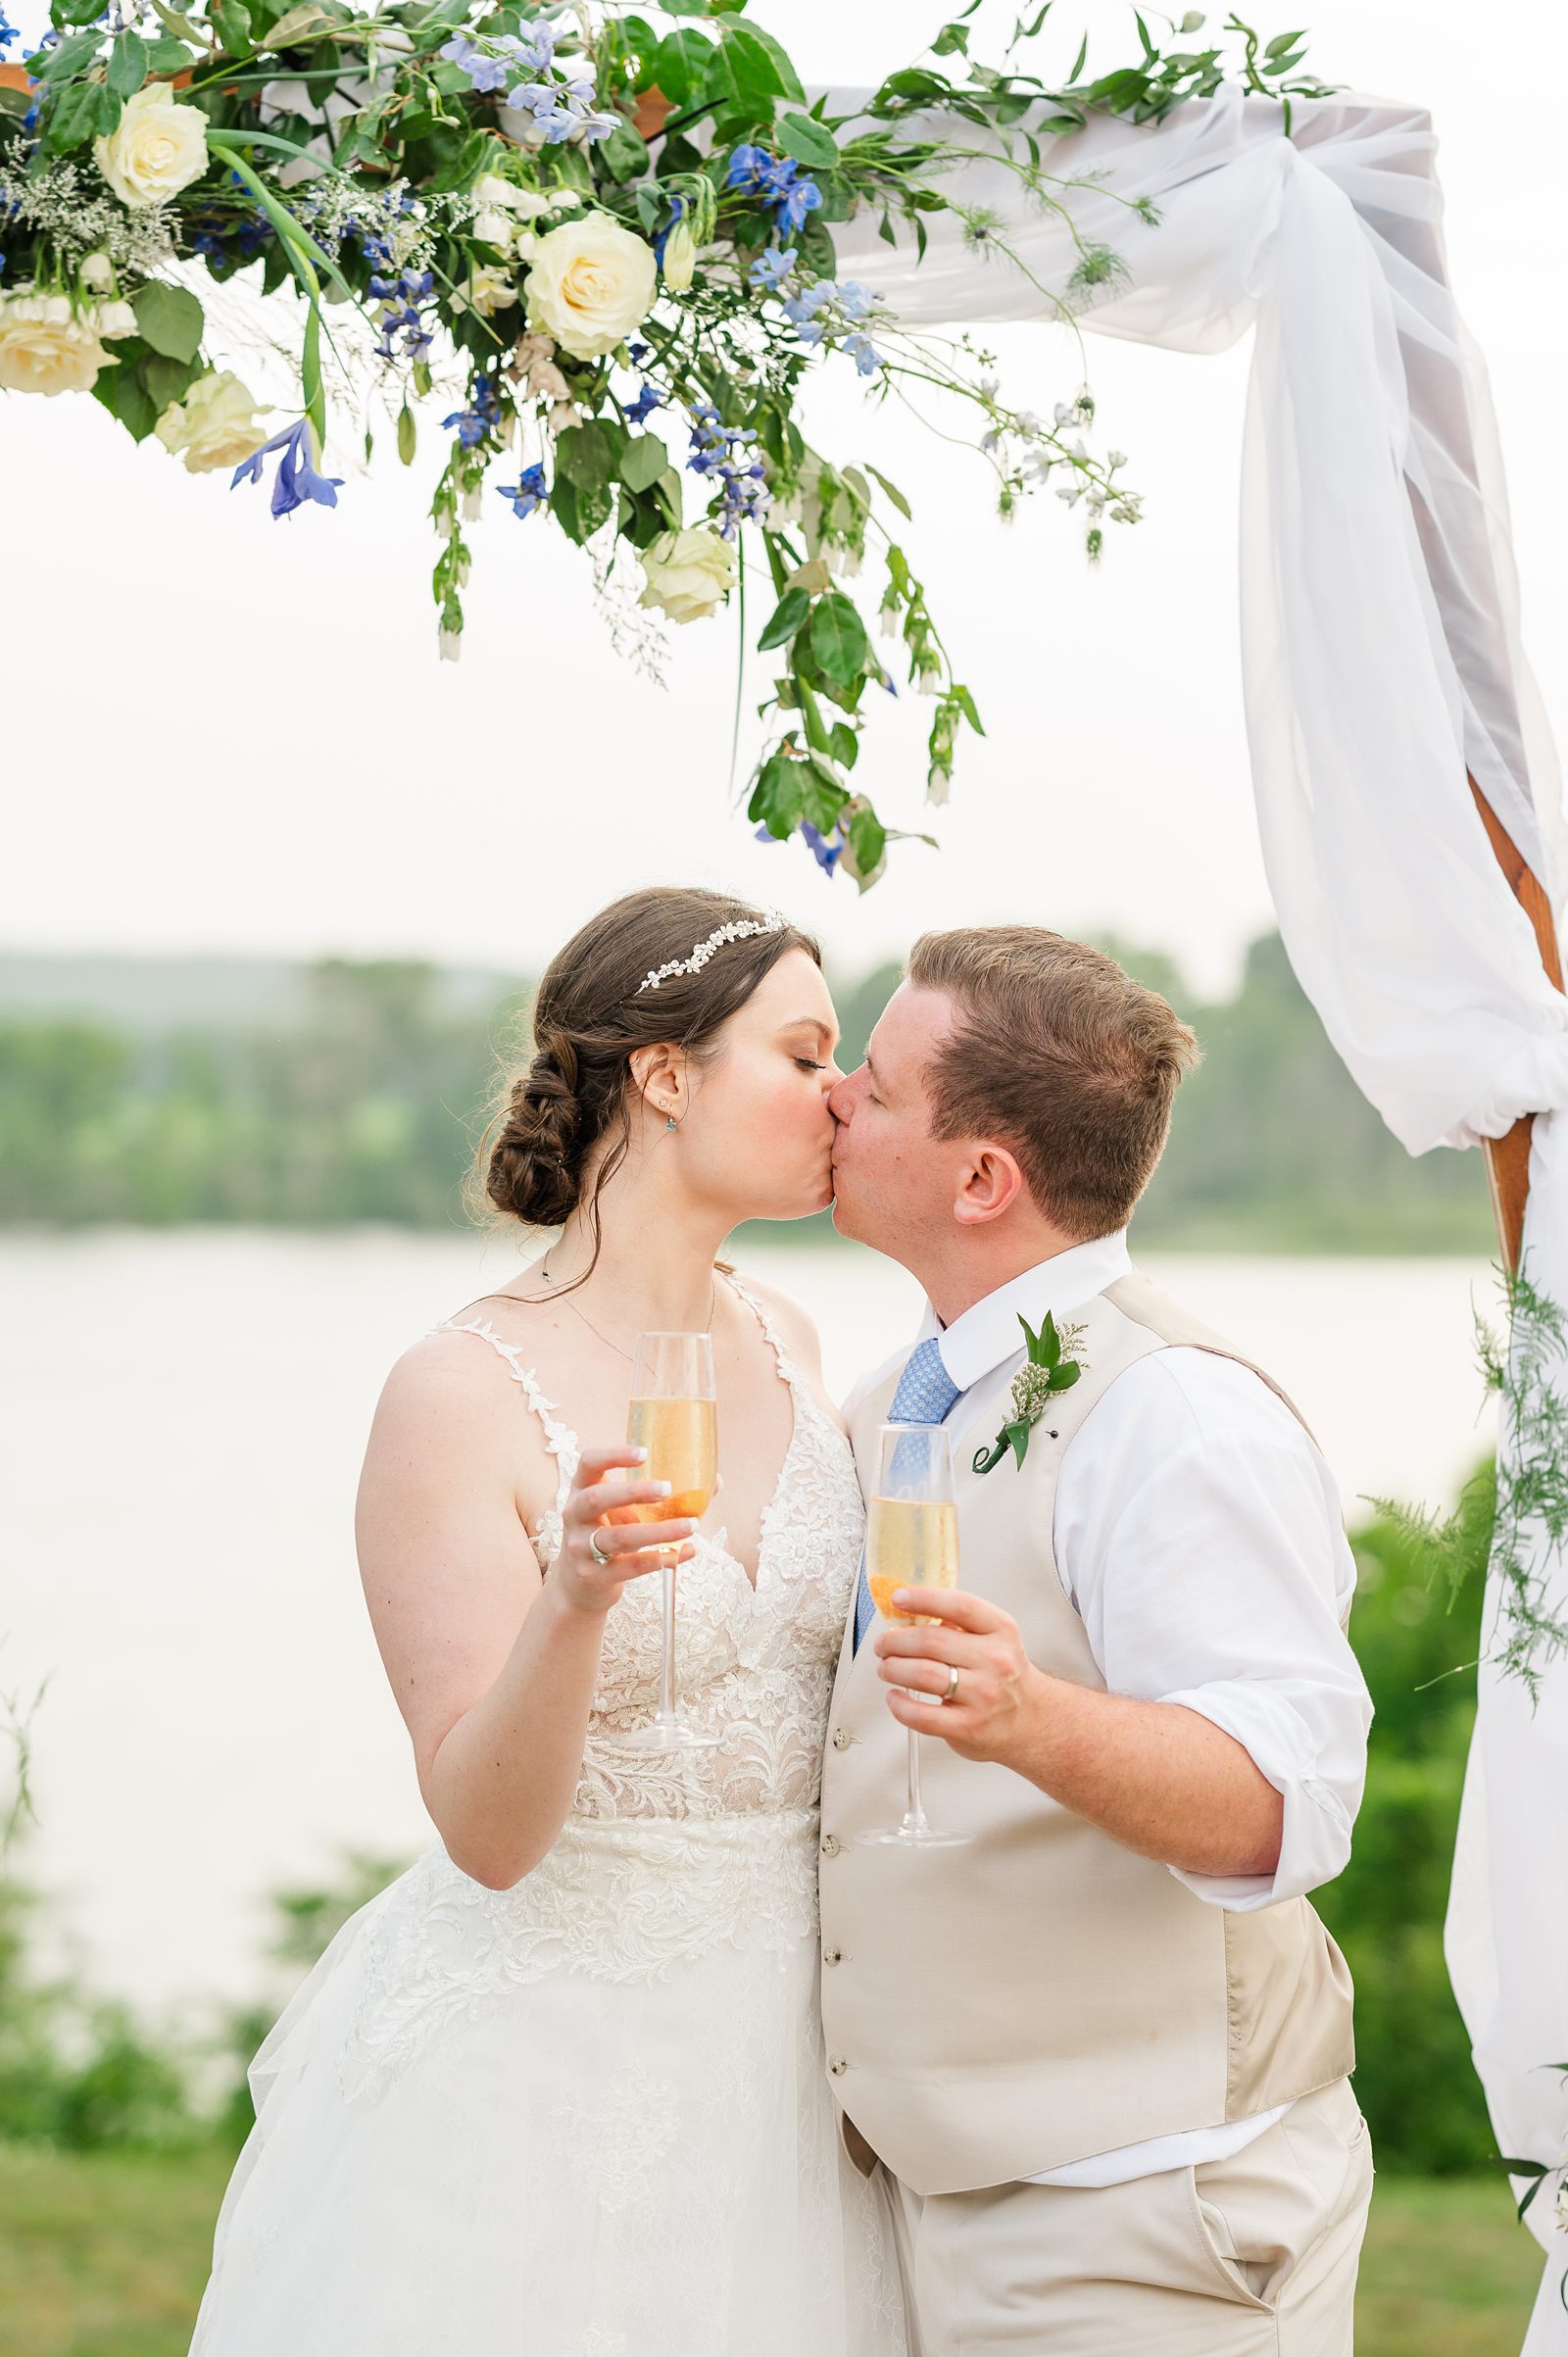 Bride and Groom Sunset Portraits at Summer Belle Grove Wedding by Virginia Wedding Photographer